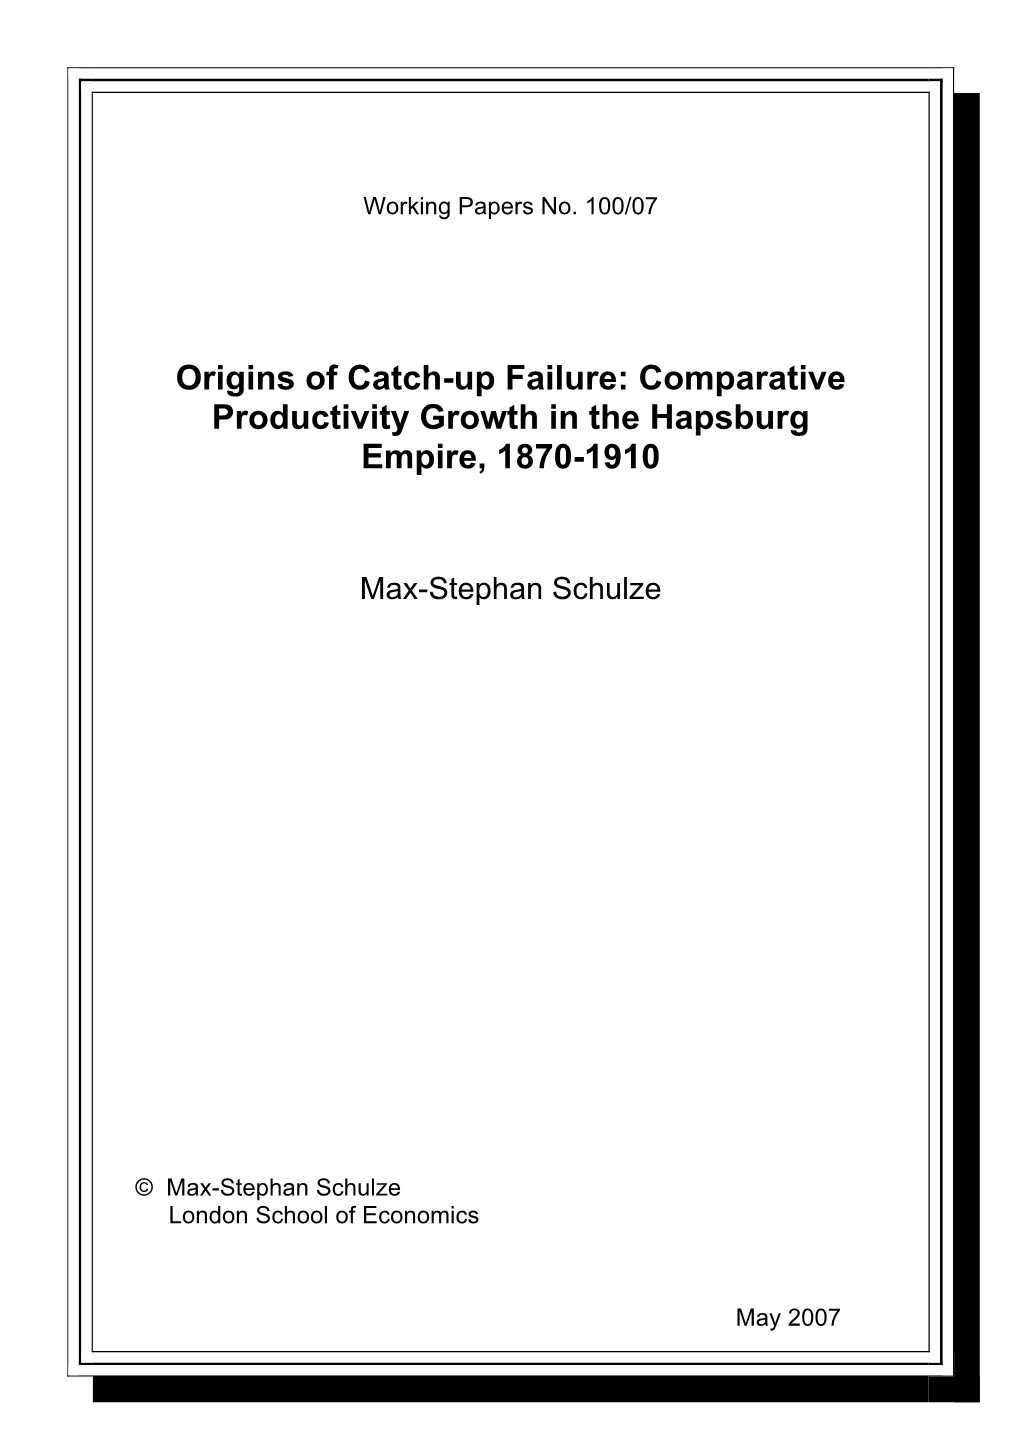 Comparative Productivity Growth in the Hapsburg Empire, 1870-1910